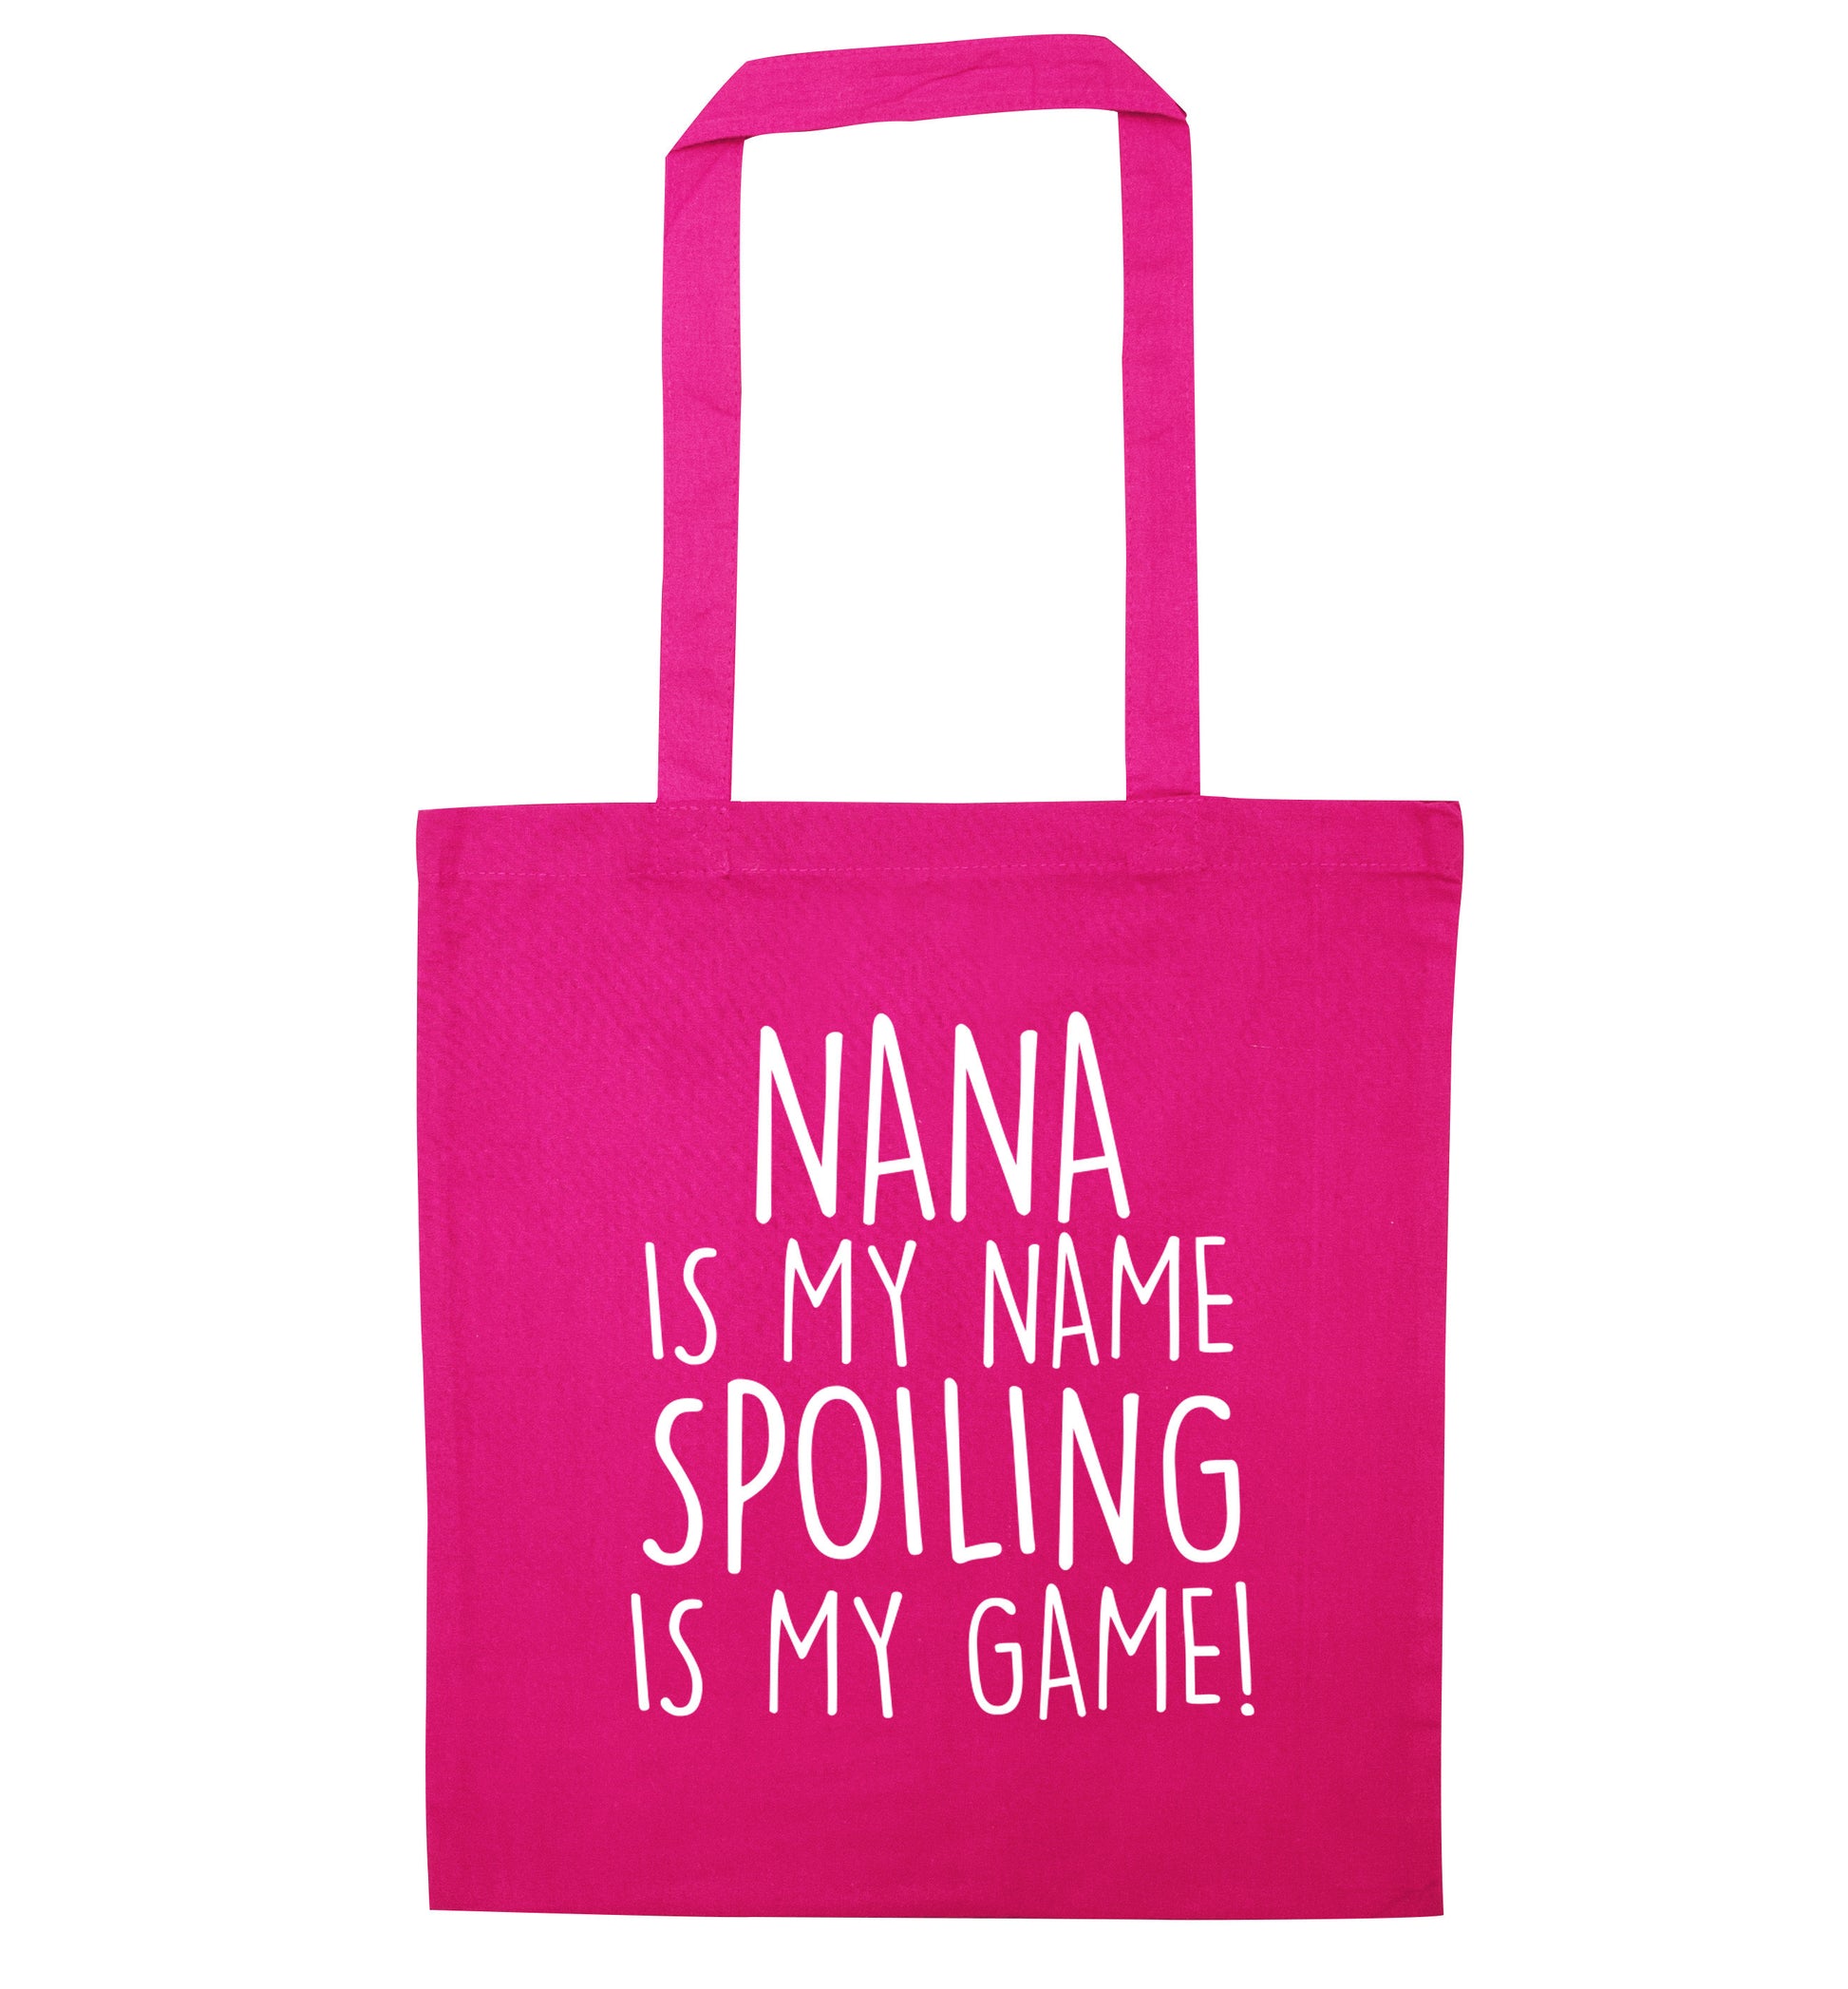 Nana is my name, spoiling is my game pink tote bag